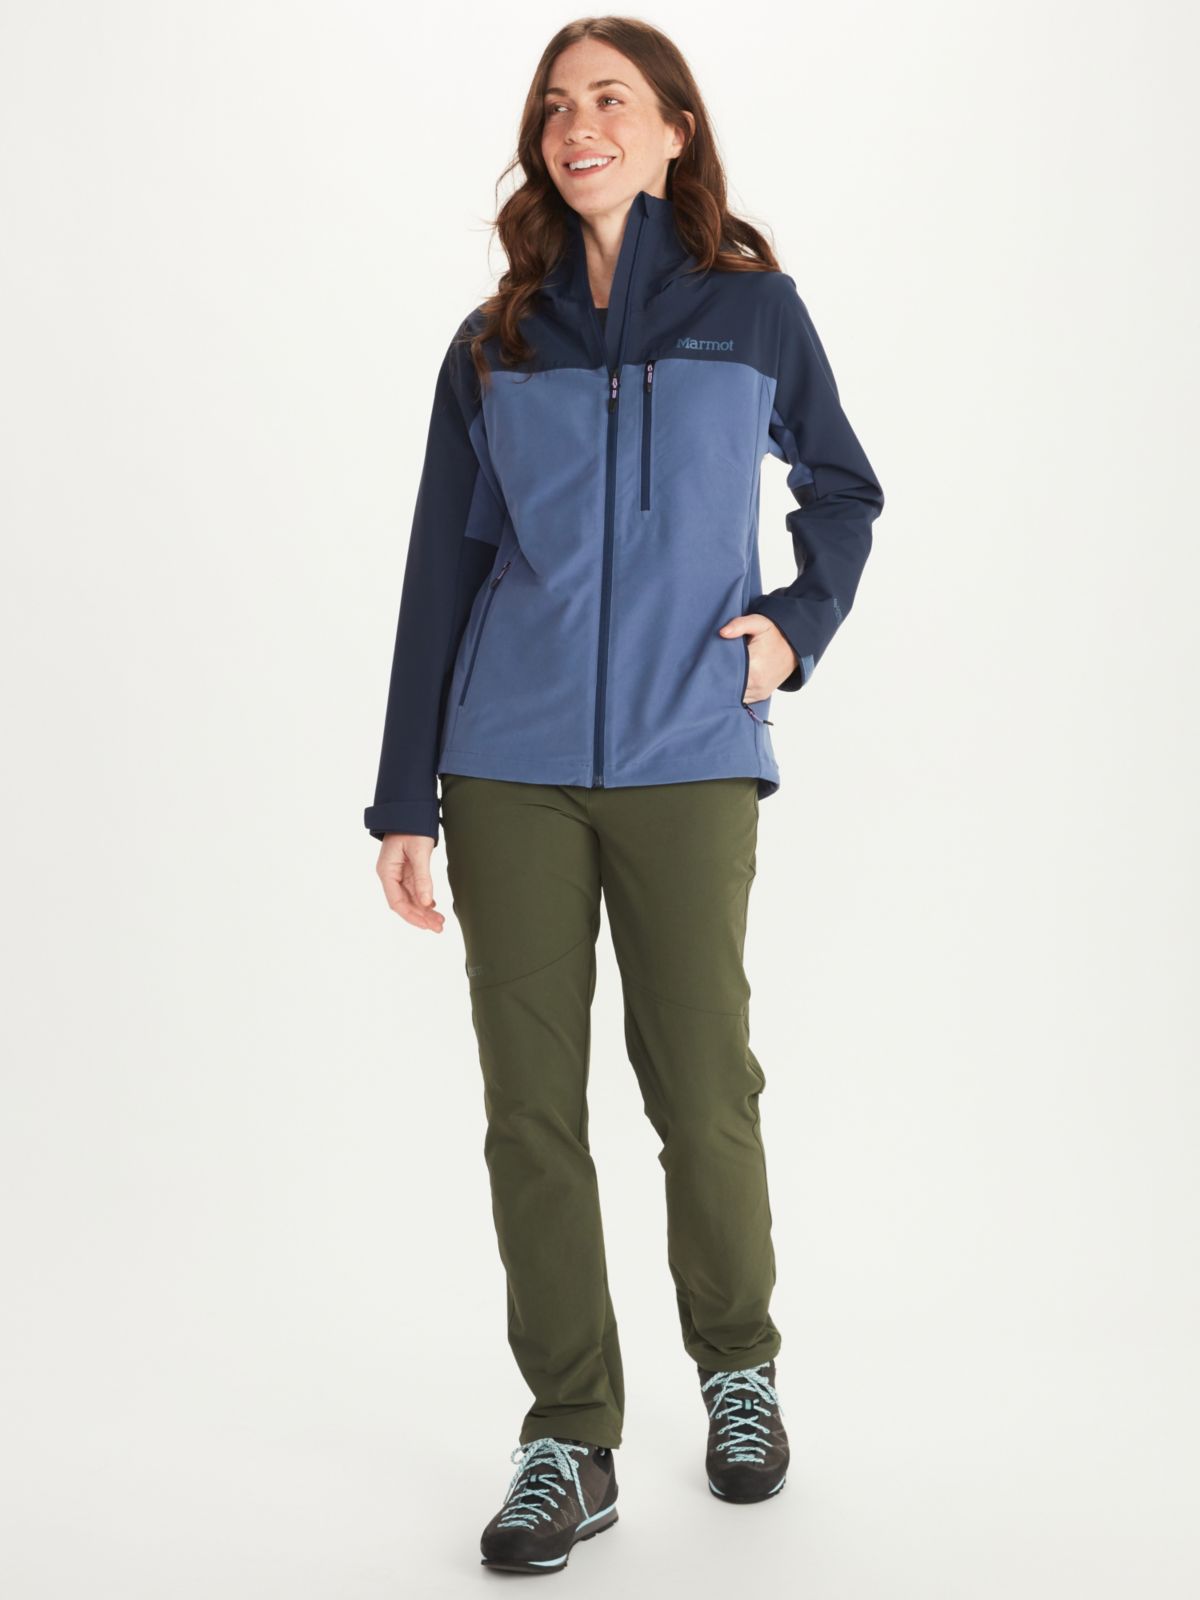 Marmot Womens ROM Jacket Anorak Softshell Jacket Breathable Outdoor Jacket Water Repellent 